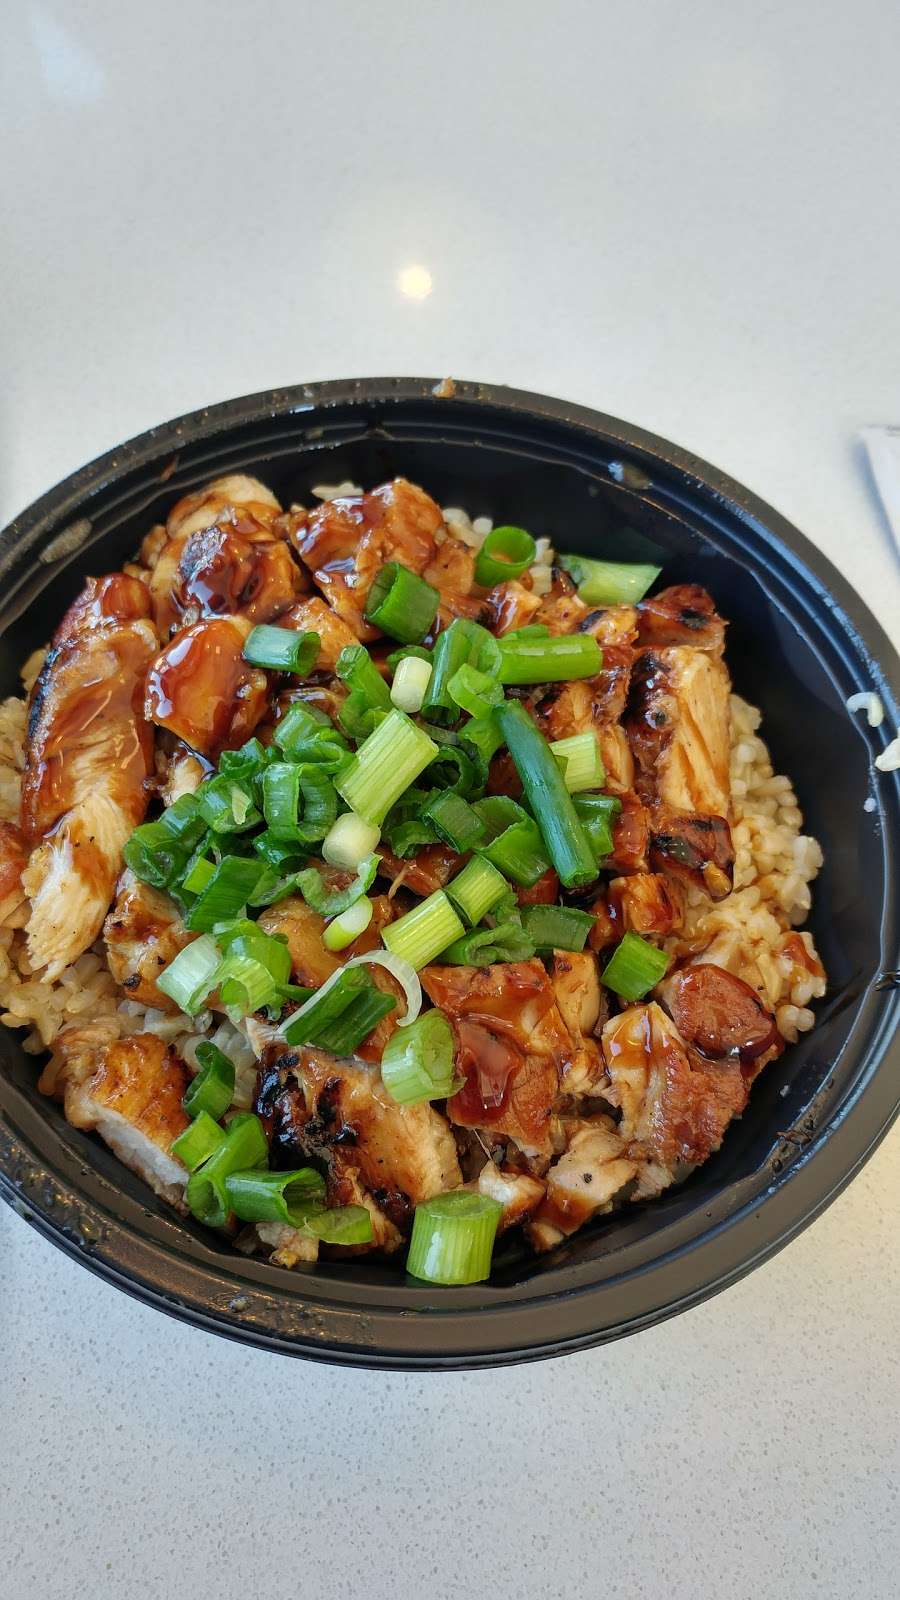 WaBa Grill | 13131 Crossroads Pkwy S #A, City of Industry, CA 91746 | Phone: (562) 463-9222